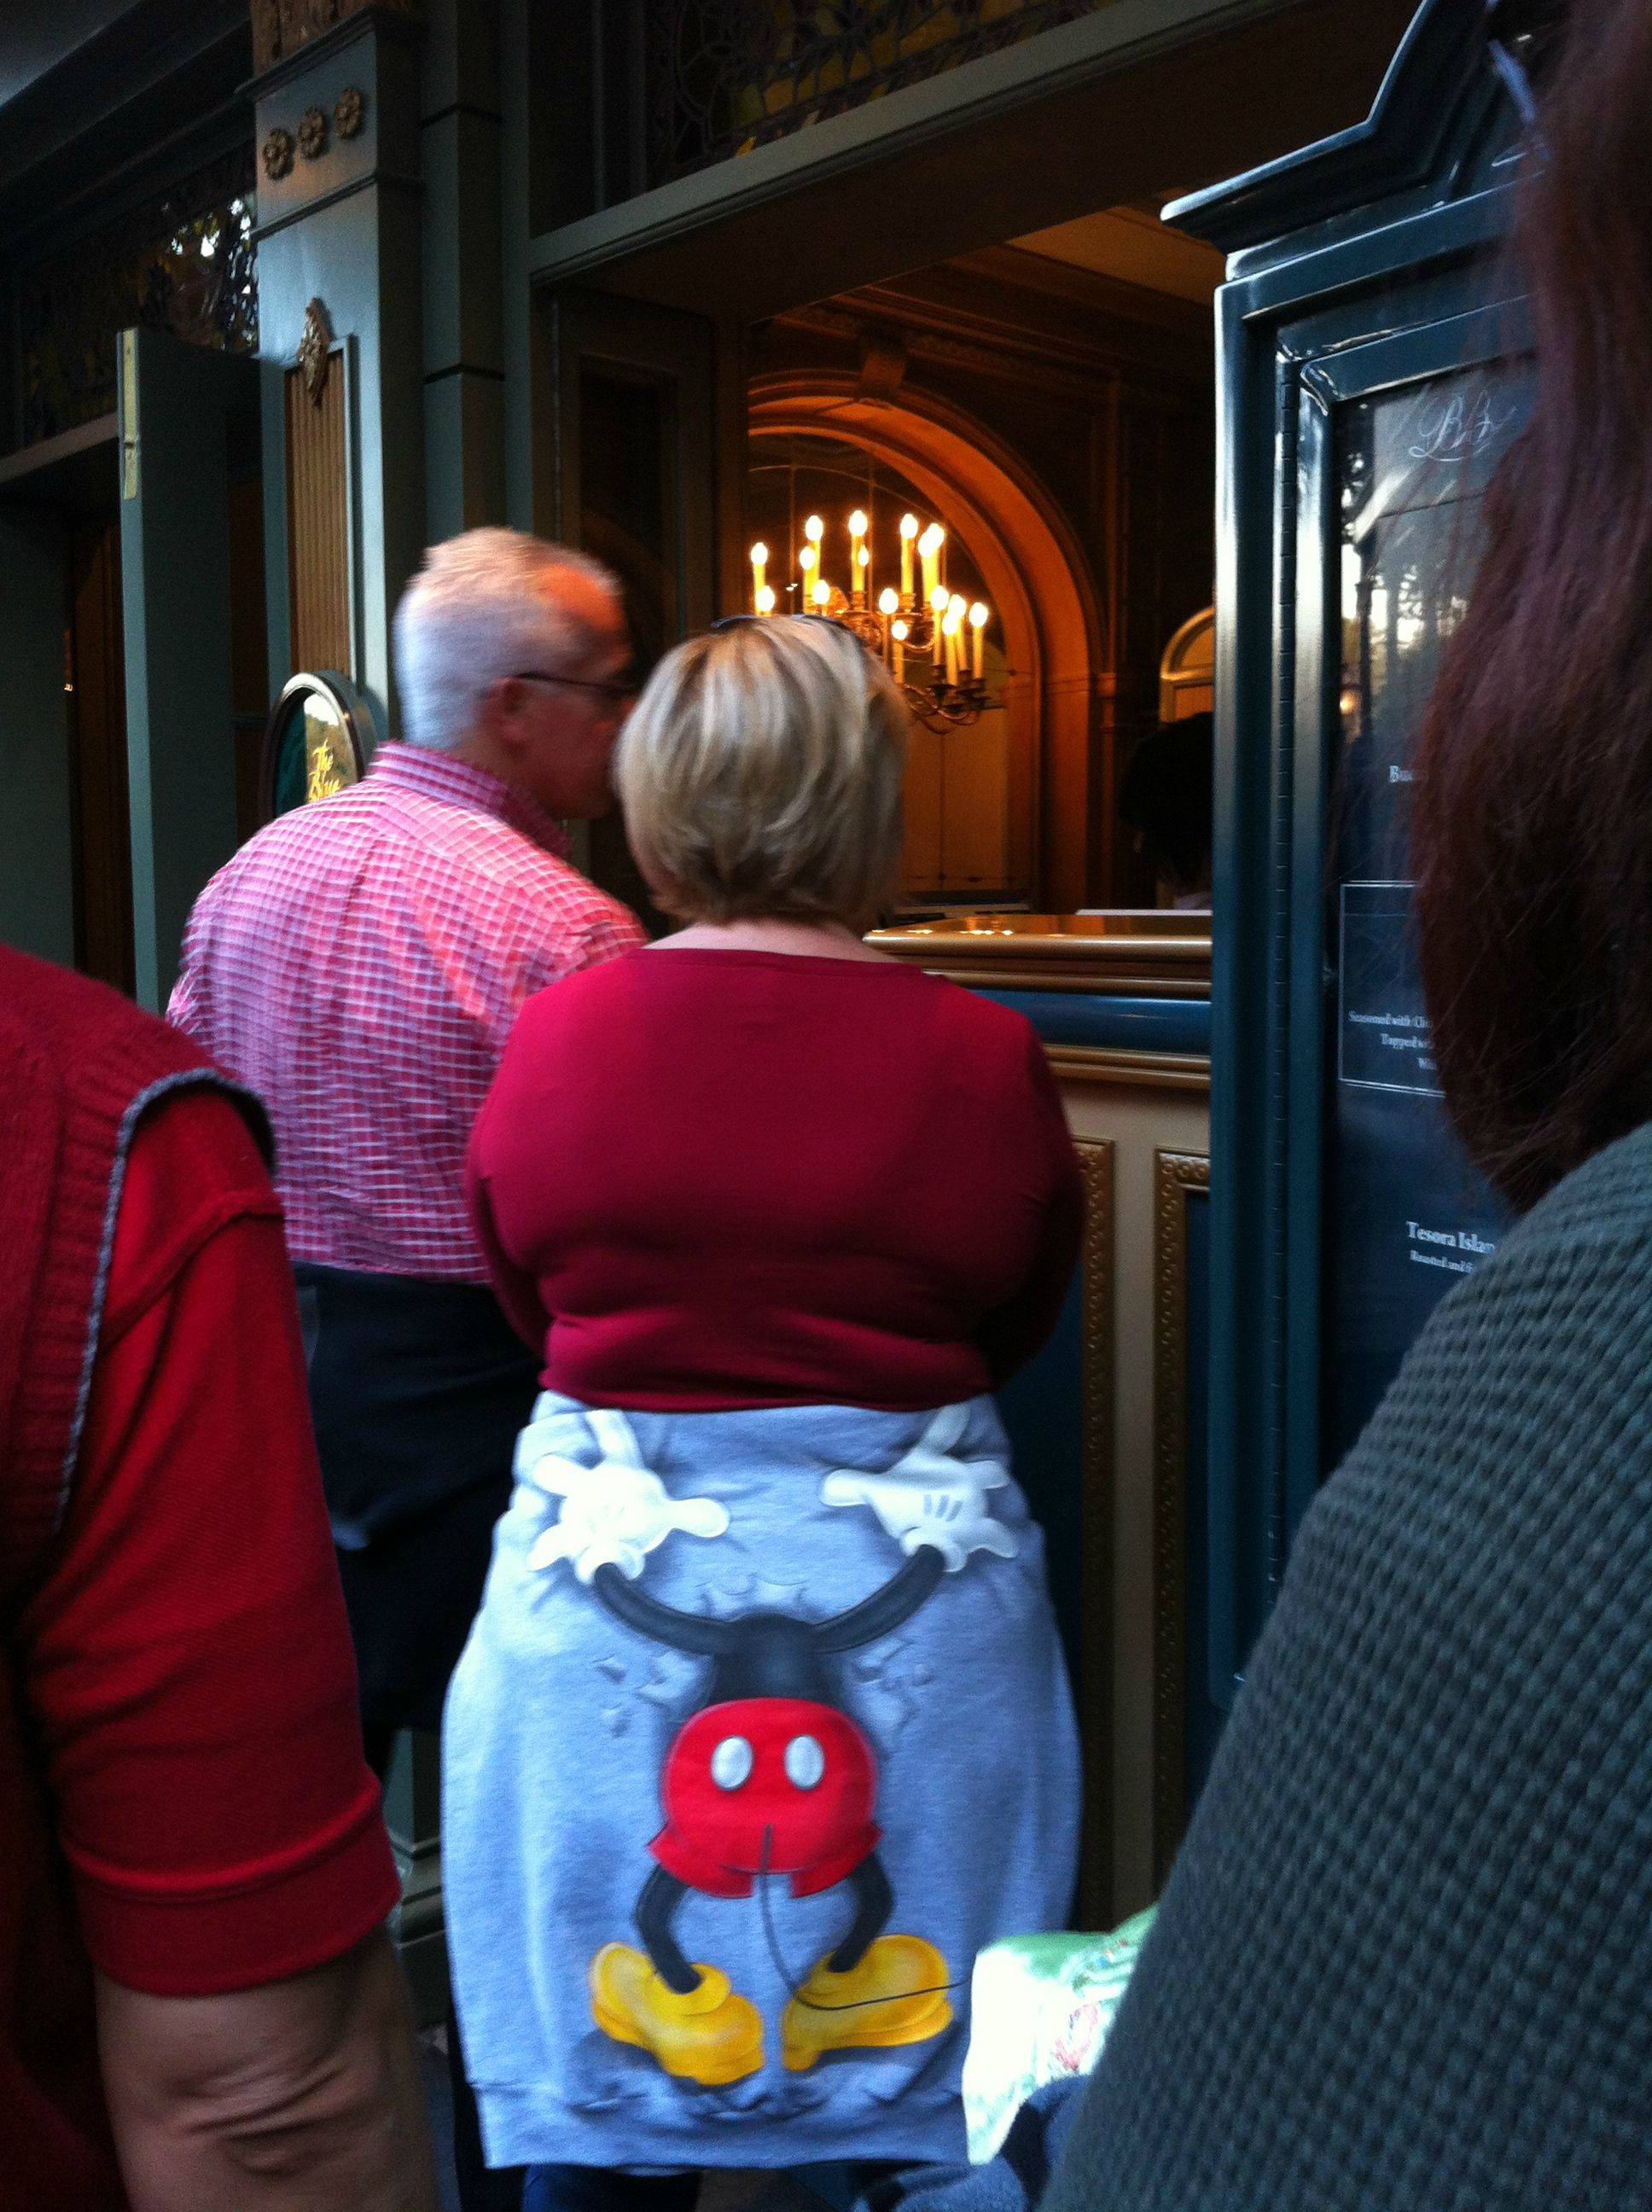 Looks like Mickey has found the backdoor entrance to the Magic Kingdom.